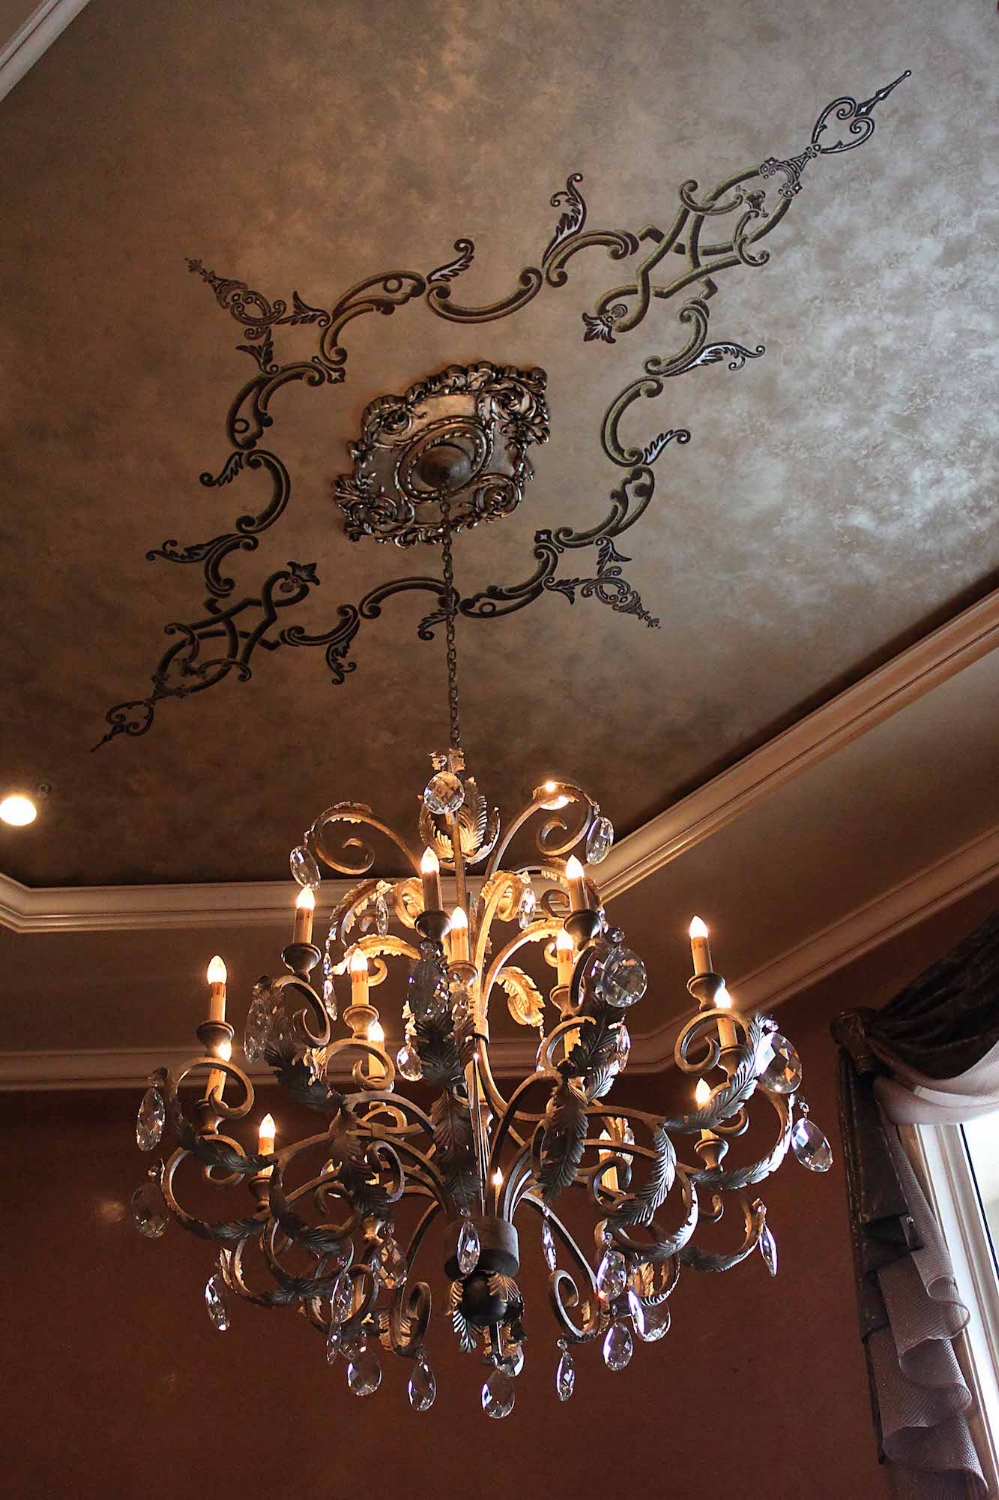  This ceiling was plastered with multiple metallic plasters accompanied with a custom embossed design with a textured plaster &amp; highlighted with gold and silver metallics. 